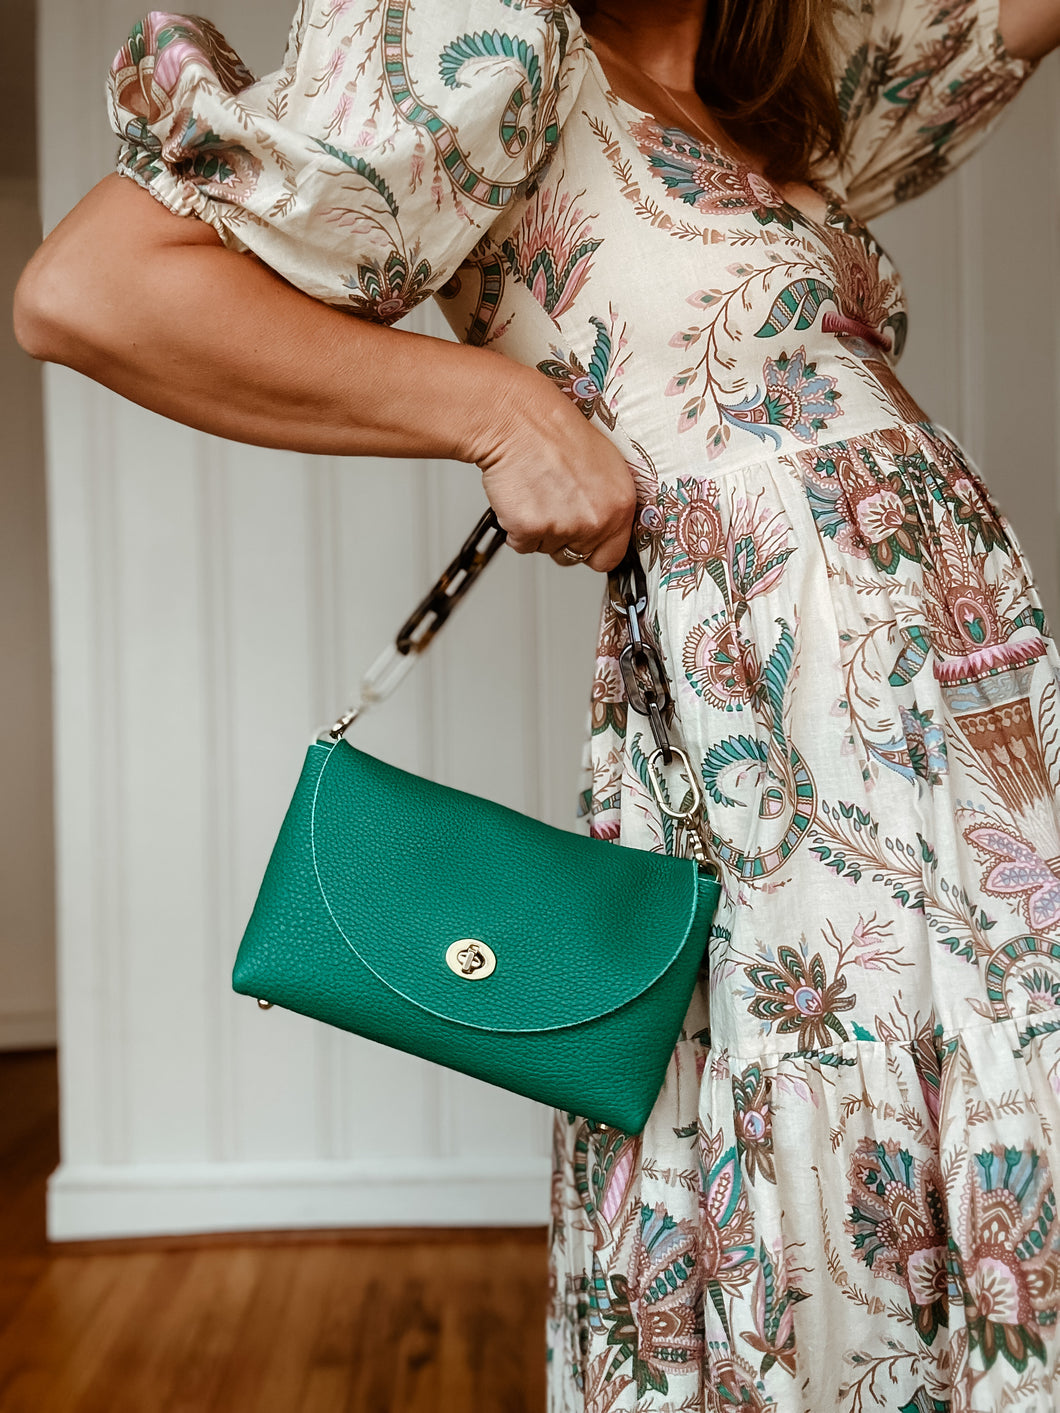 Cope & Co. Petite Flap Bag Milled Liberty Green Leather Bag